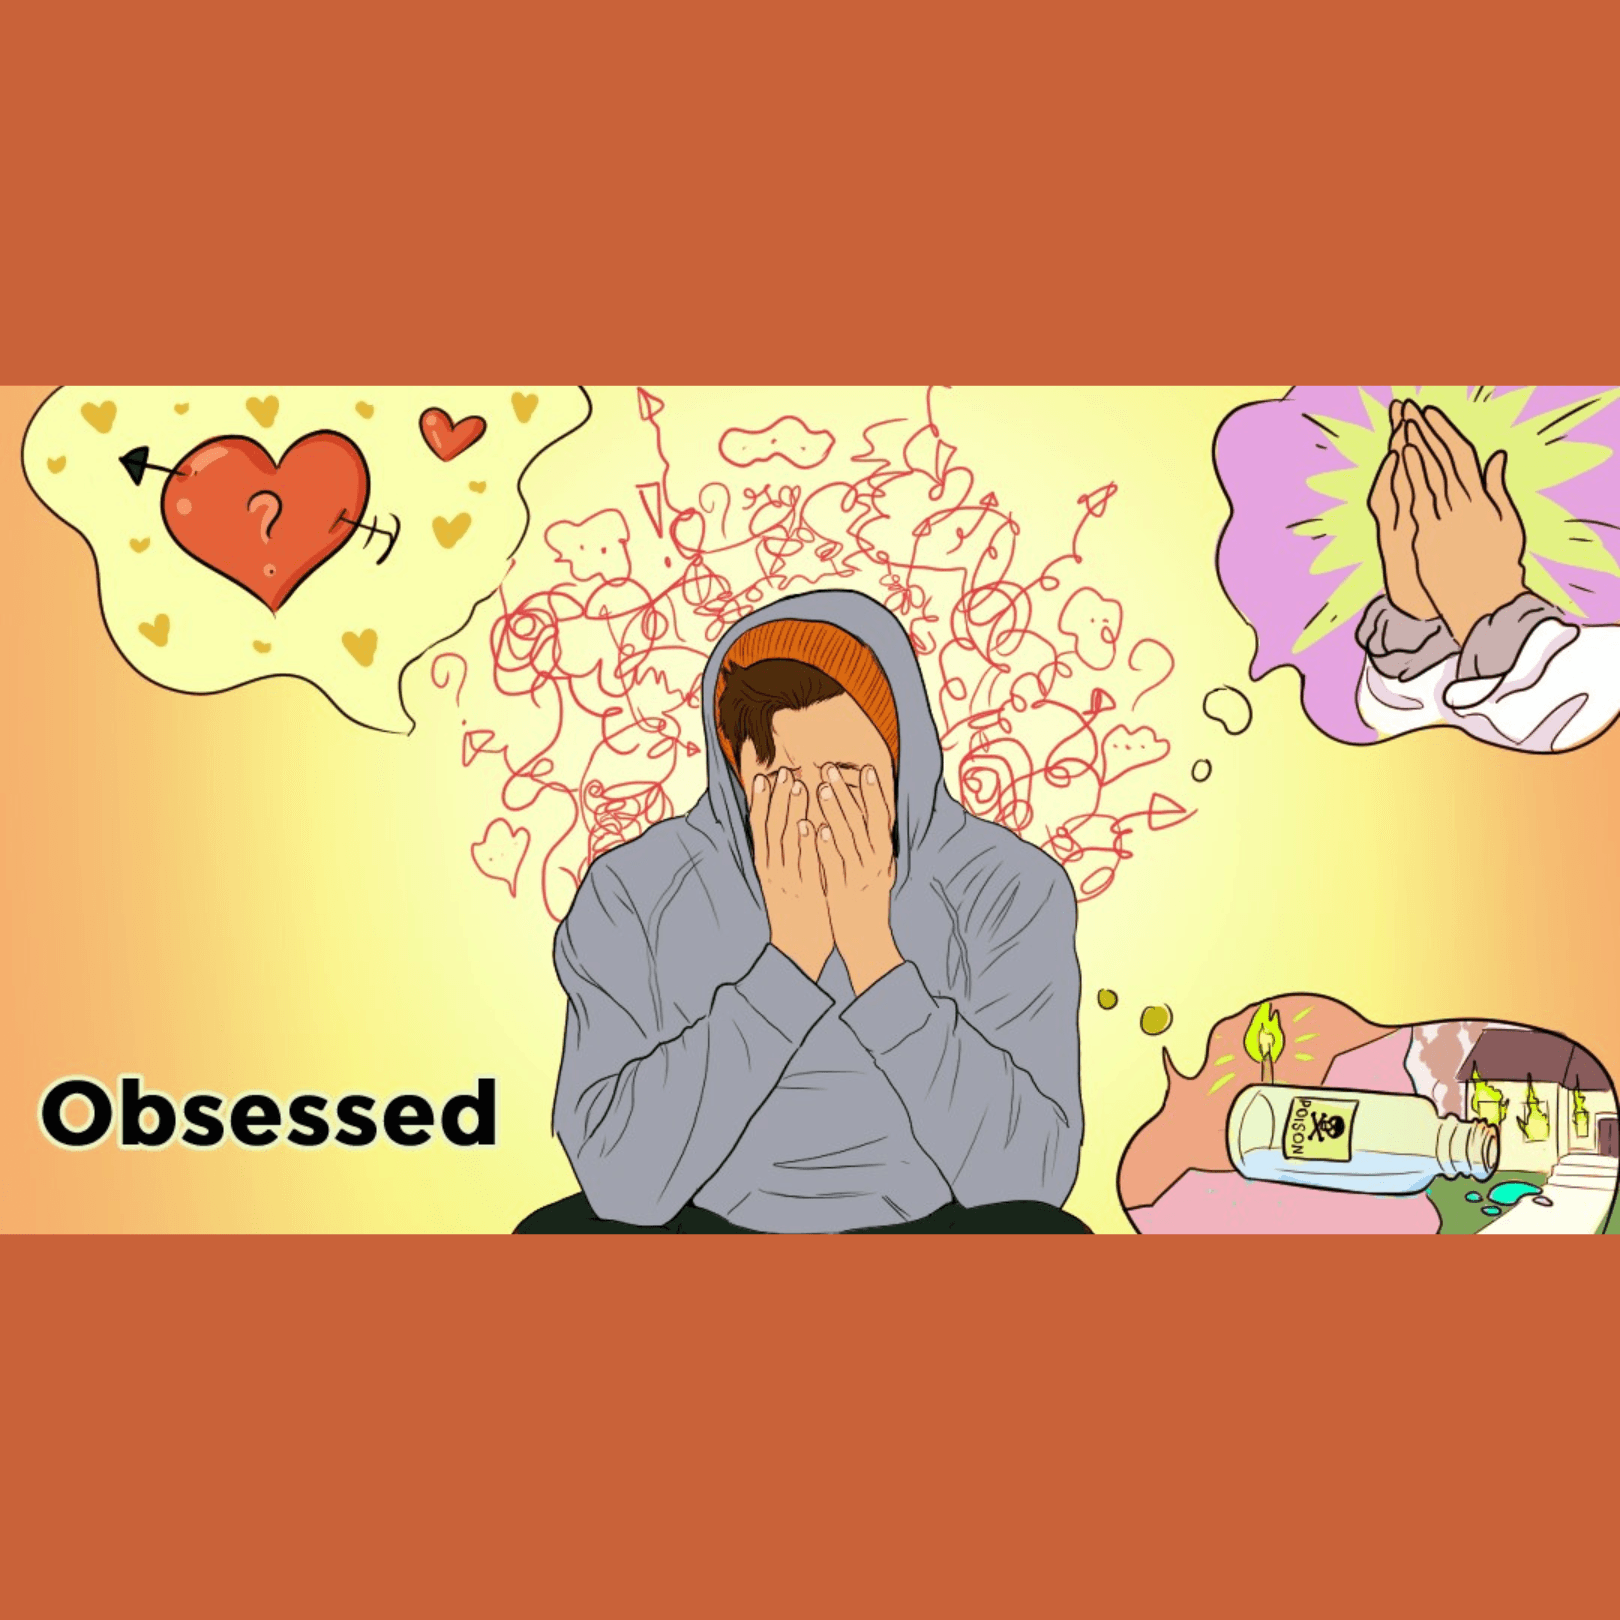 Thumbnail for "Obsessed: Breaking The OCD Cycle".